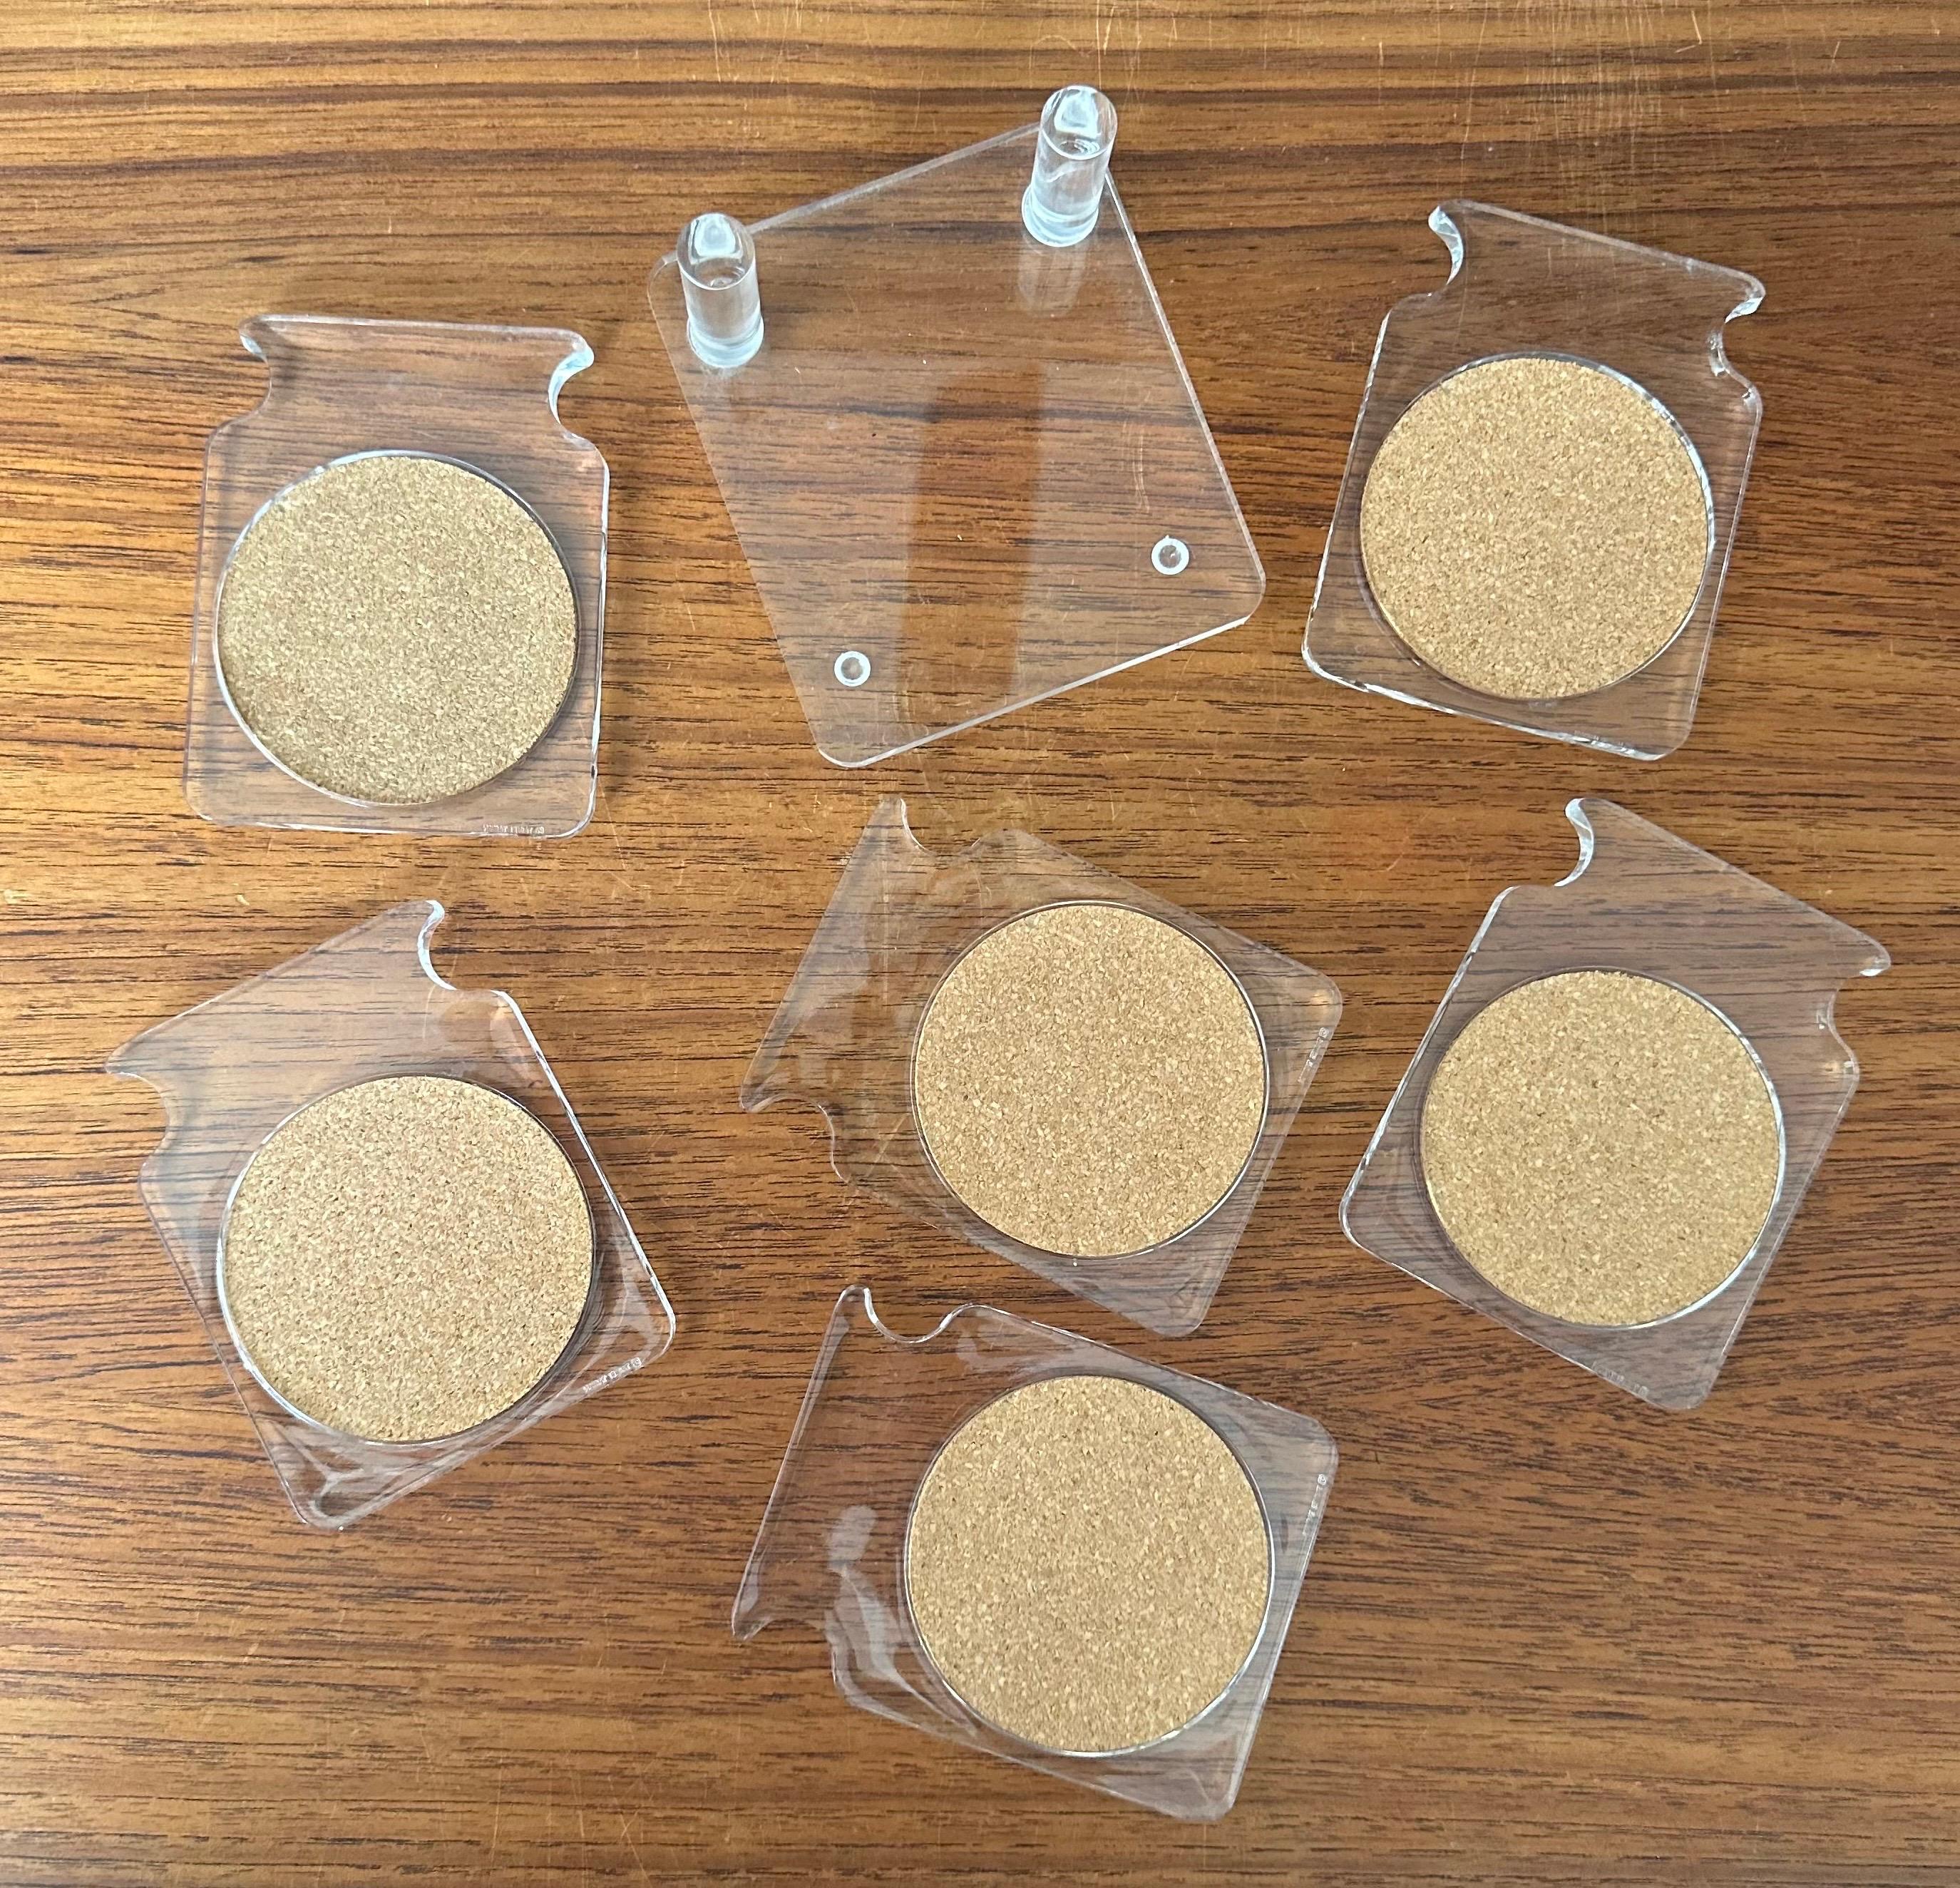 A nice set of six Lucite drink coasters and holder, circa 1970s. The coasters have a cork lining and are in very good vintage condition; the set measures 4.25